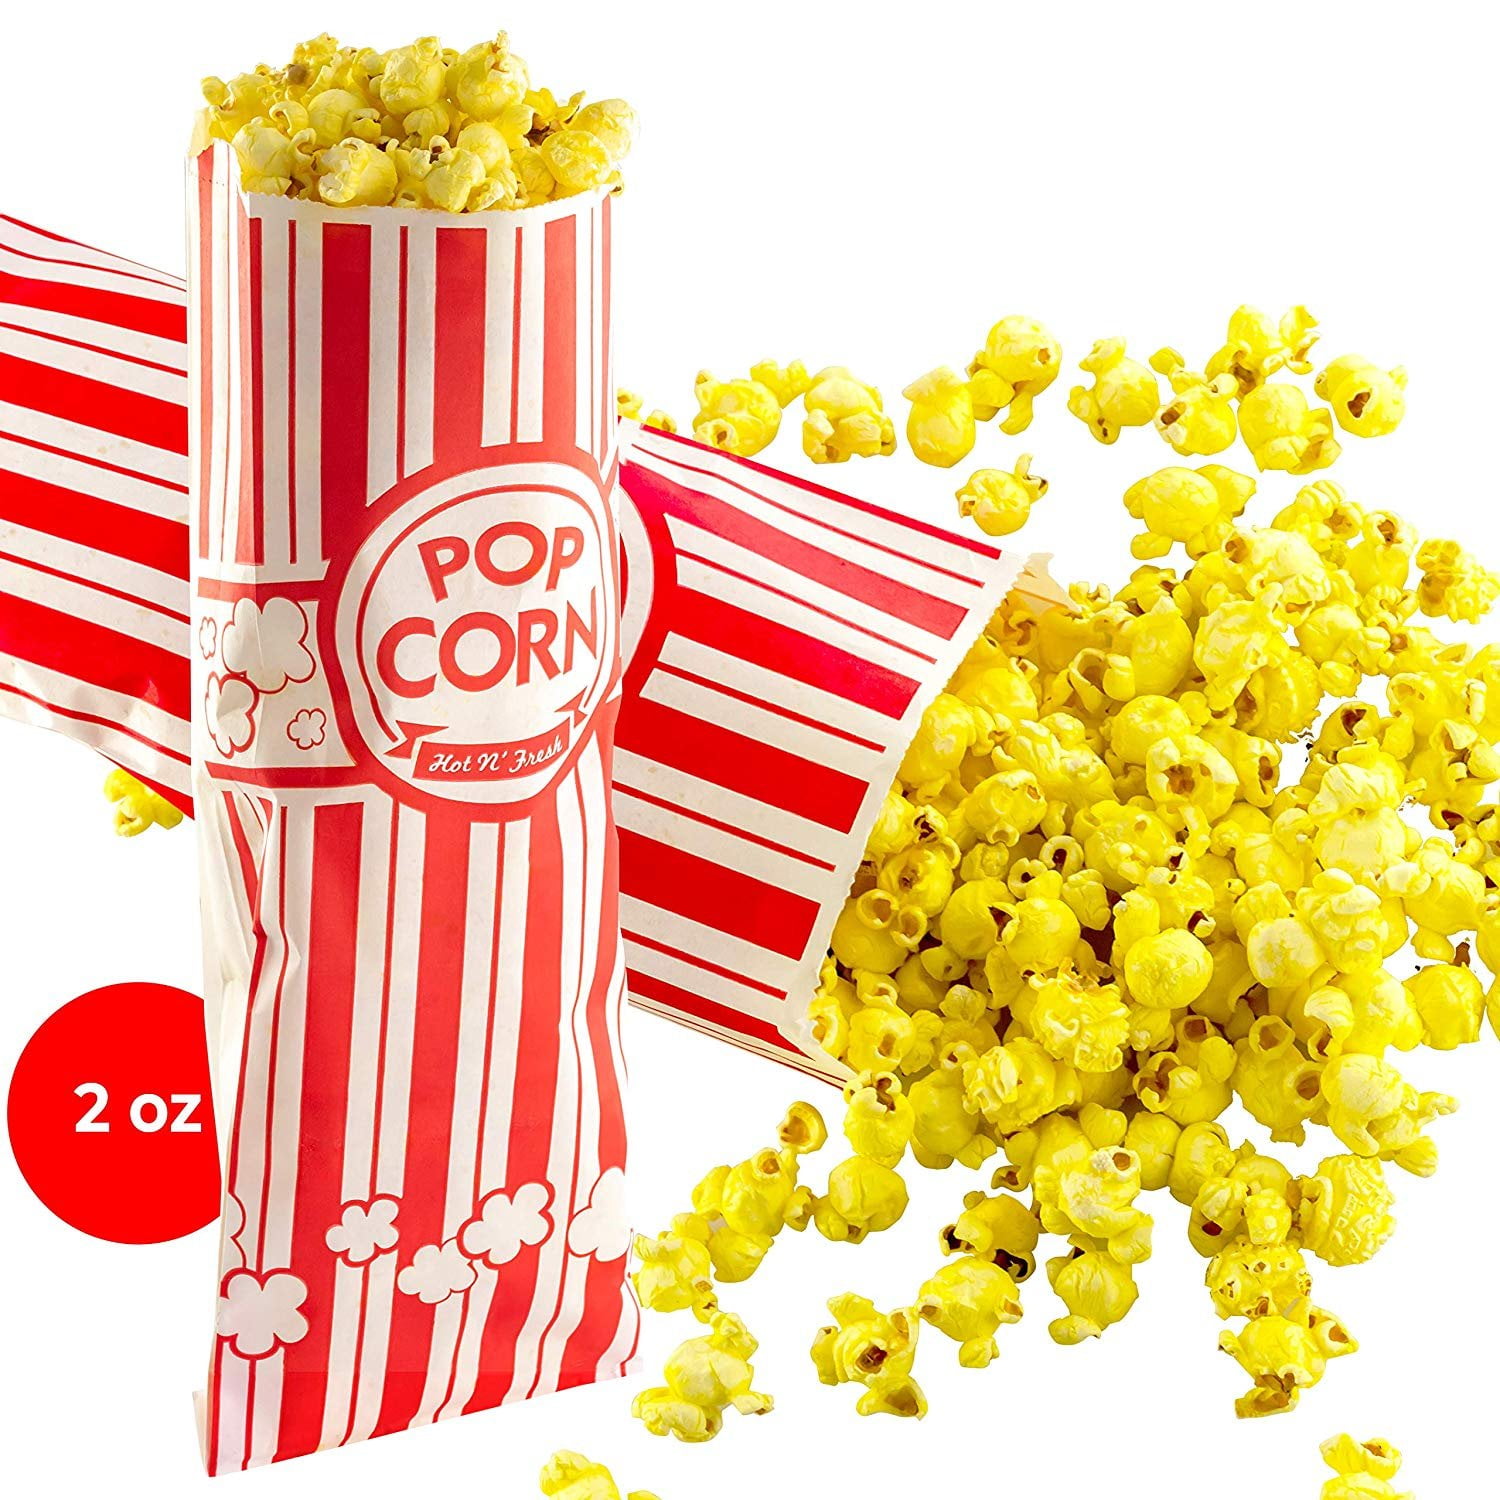 Great Movie Theme Party Supplies or Old Fashioned Carnivals /& Fundraisers! Popcorn Bags 100 Pack Coated for Leak//Tear Resistance Single Serving 2oz Paper Sleeves in Nostalgic Red//White Design